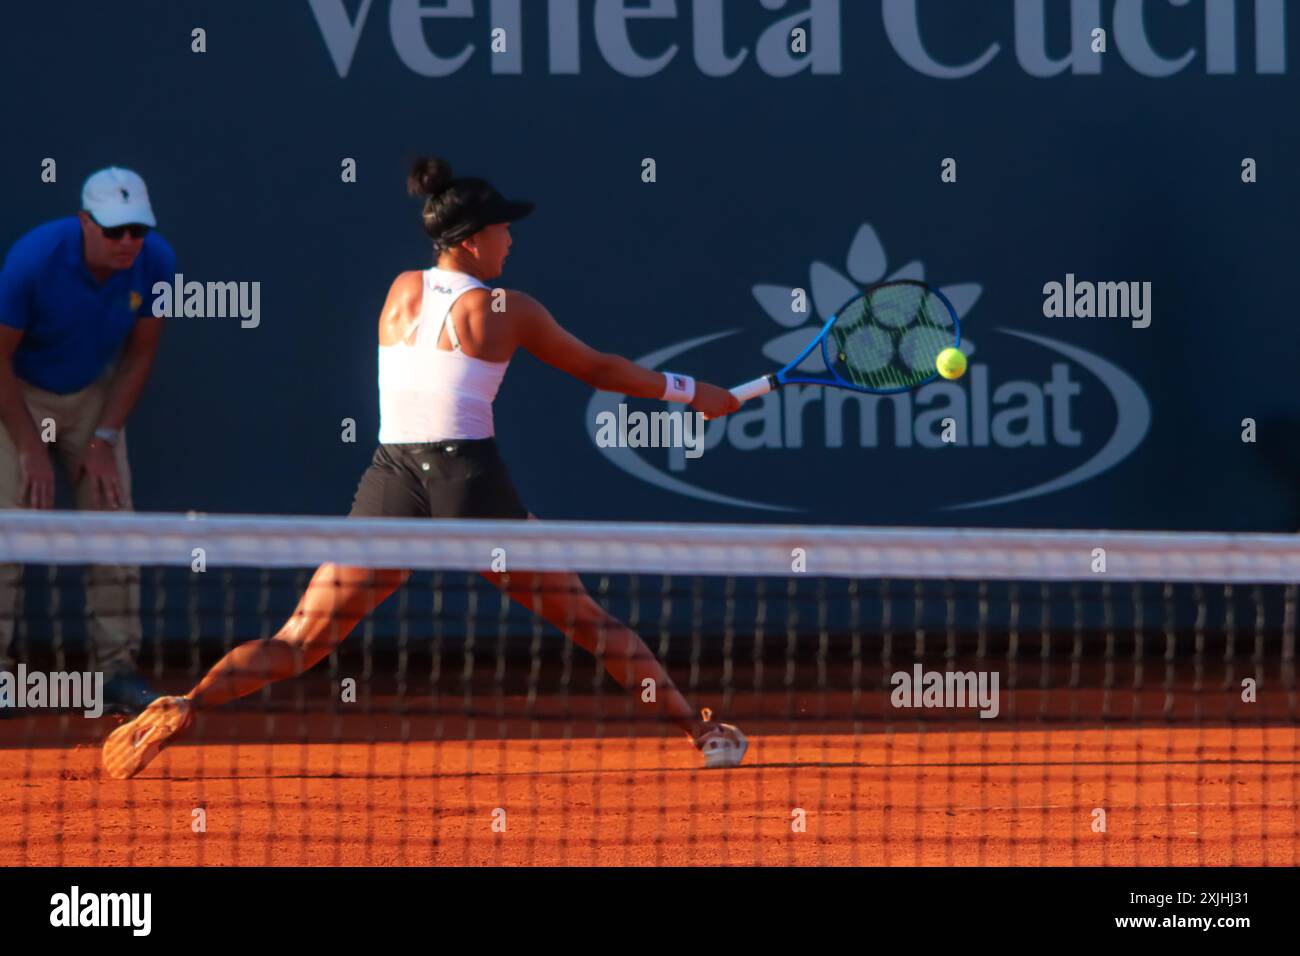 Palermo, Italy. 18th July, 2024. Ann Li during the Women's Tennis Association match against Peyton Mckenzie Stearns (not pictured) at the Palermo Ladies Open 2024. Ann Li beats Peyton Mckenzie Stearns 3-6 7-6 6-2. (Photo by Antonio Melita/Pacific Press) Credit: Pacific Press Media Production Corp./Alamy Live News Stock Photo